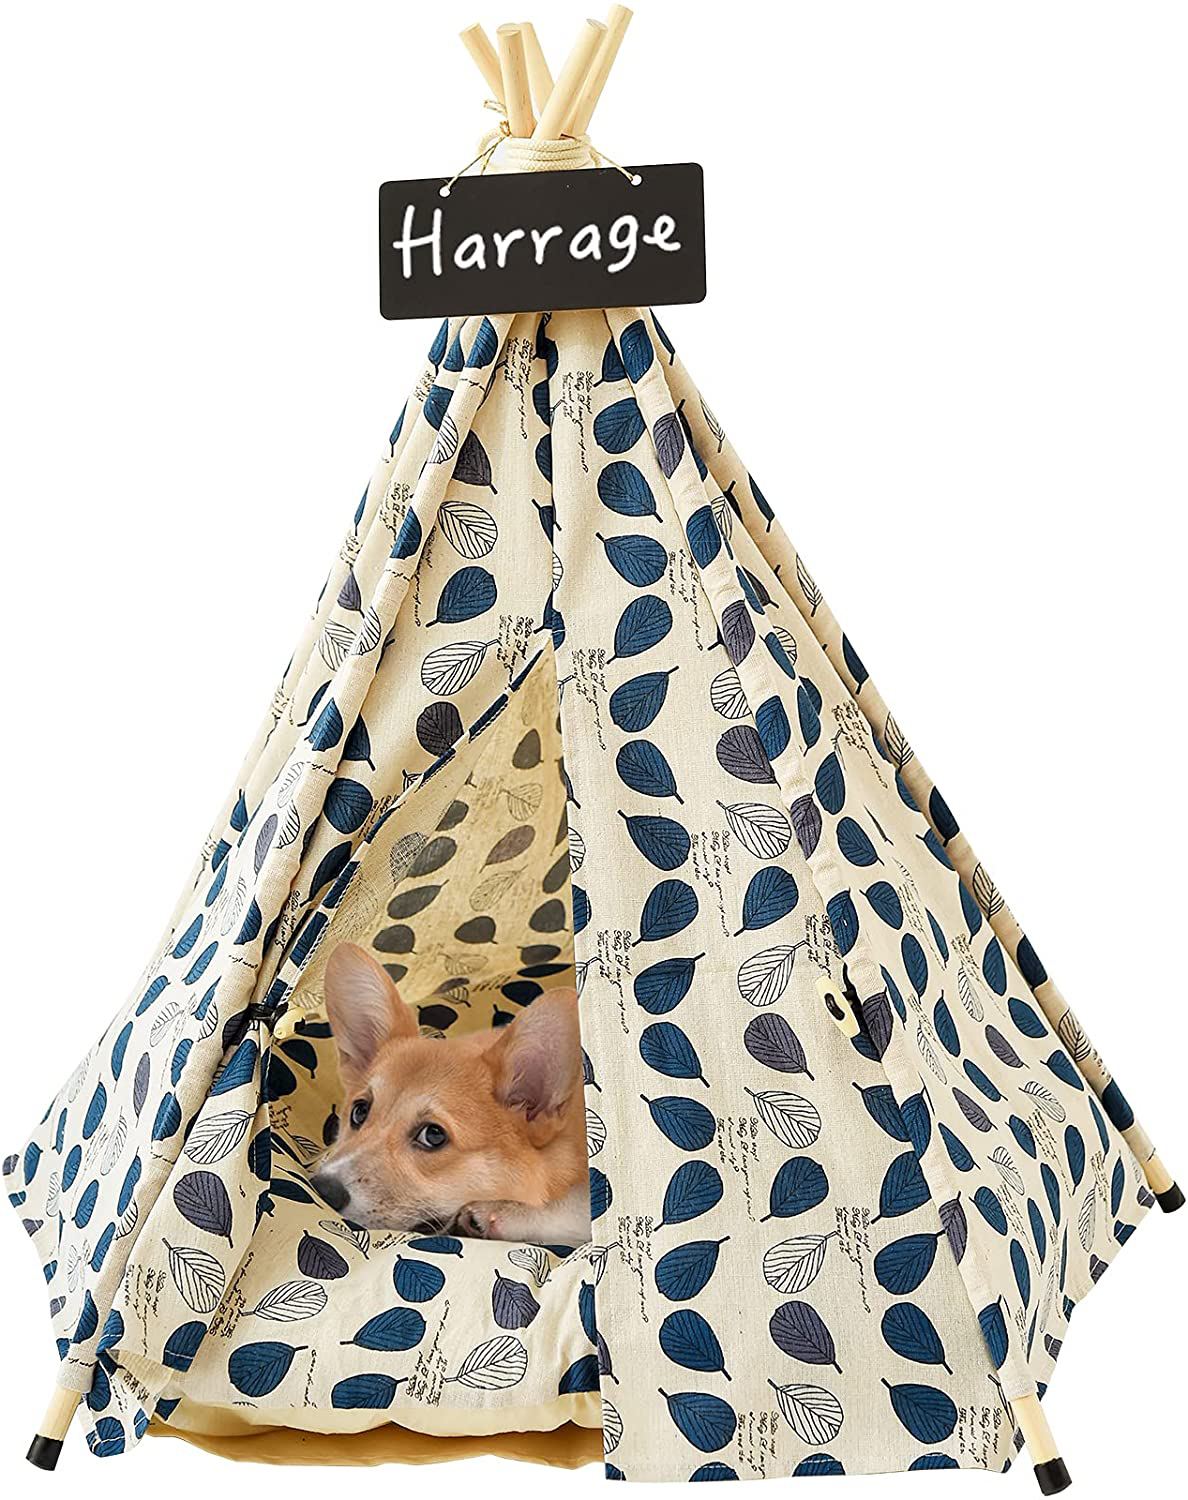 Harrage Folding Indoor Dogs House, Portable Pet Teepee Dog & Cat Tents, 24Inch Small Dog & Cat Cute Puppy House with Cushion Bed Animals & Pet Supplies > Pet Supplies > Dog Supplies > Dog Houses Harrage Blue Leaf  